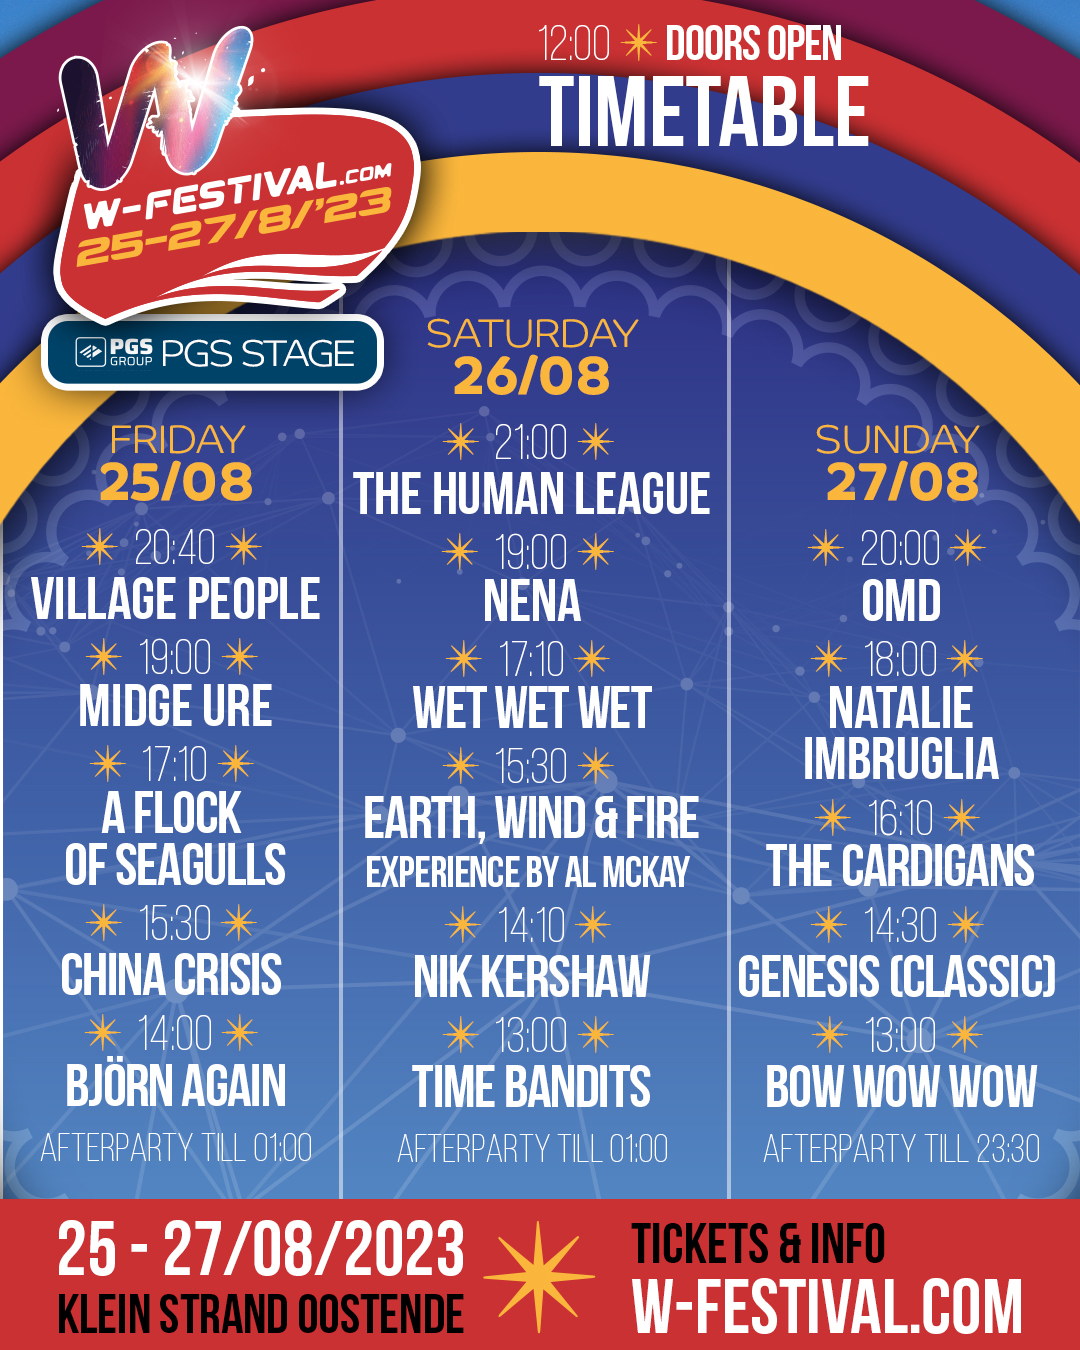 WFestival Timetable for WFestival 2023 is available!